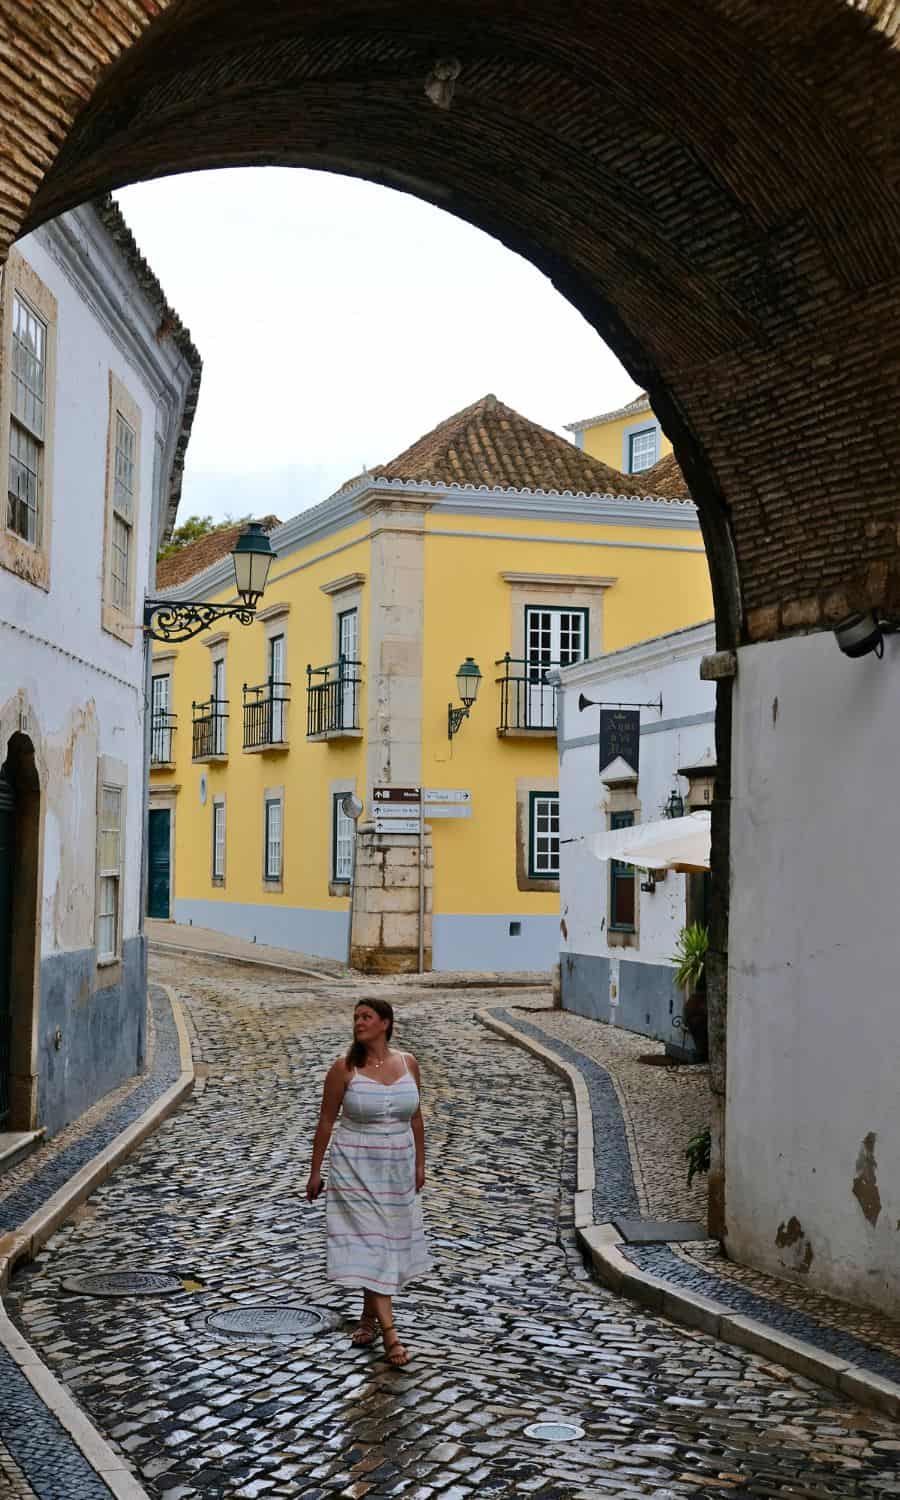 Solo female traveler walking under an archway on the cobblestone streets of Faro, surrounded by classic Portuguese architecture with a hint of vibrant yellow on the building facades.